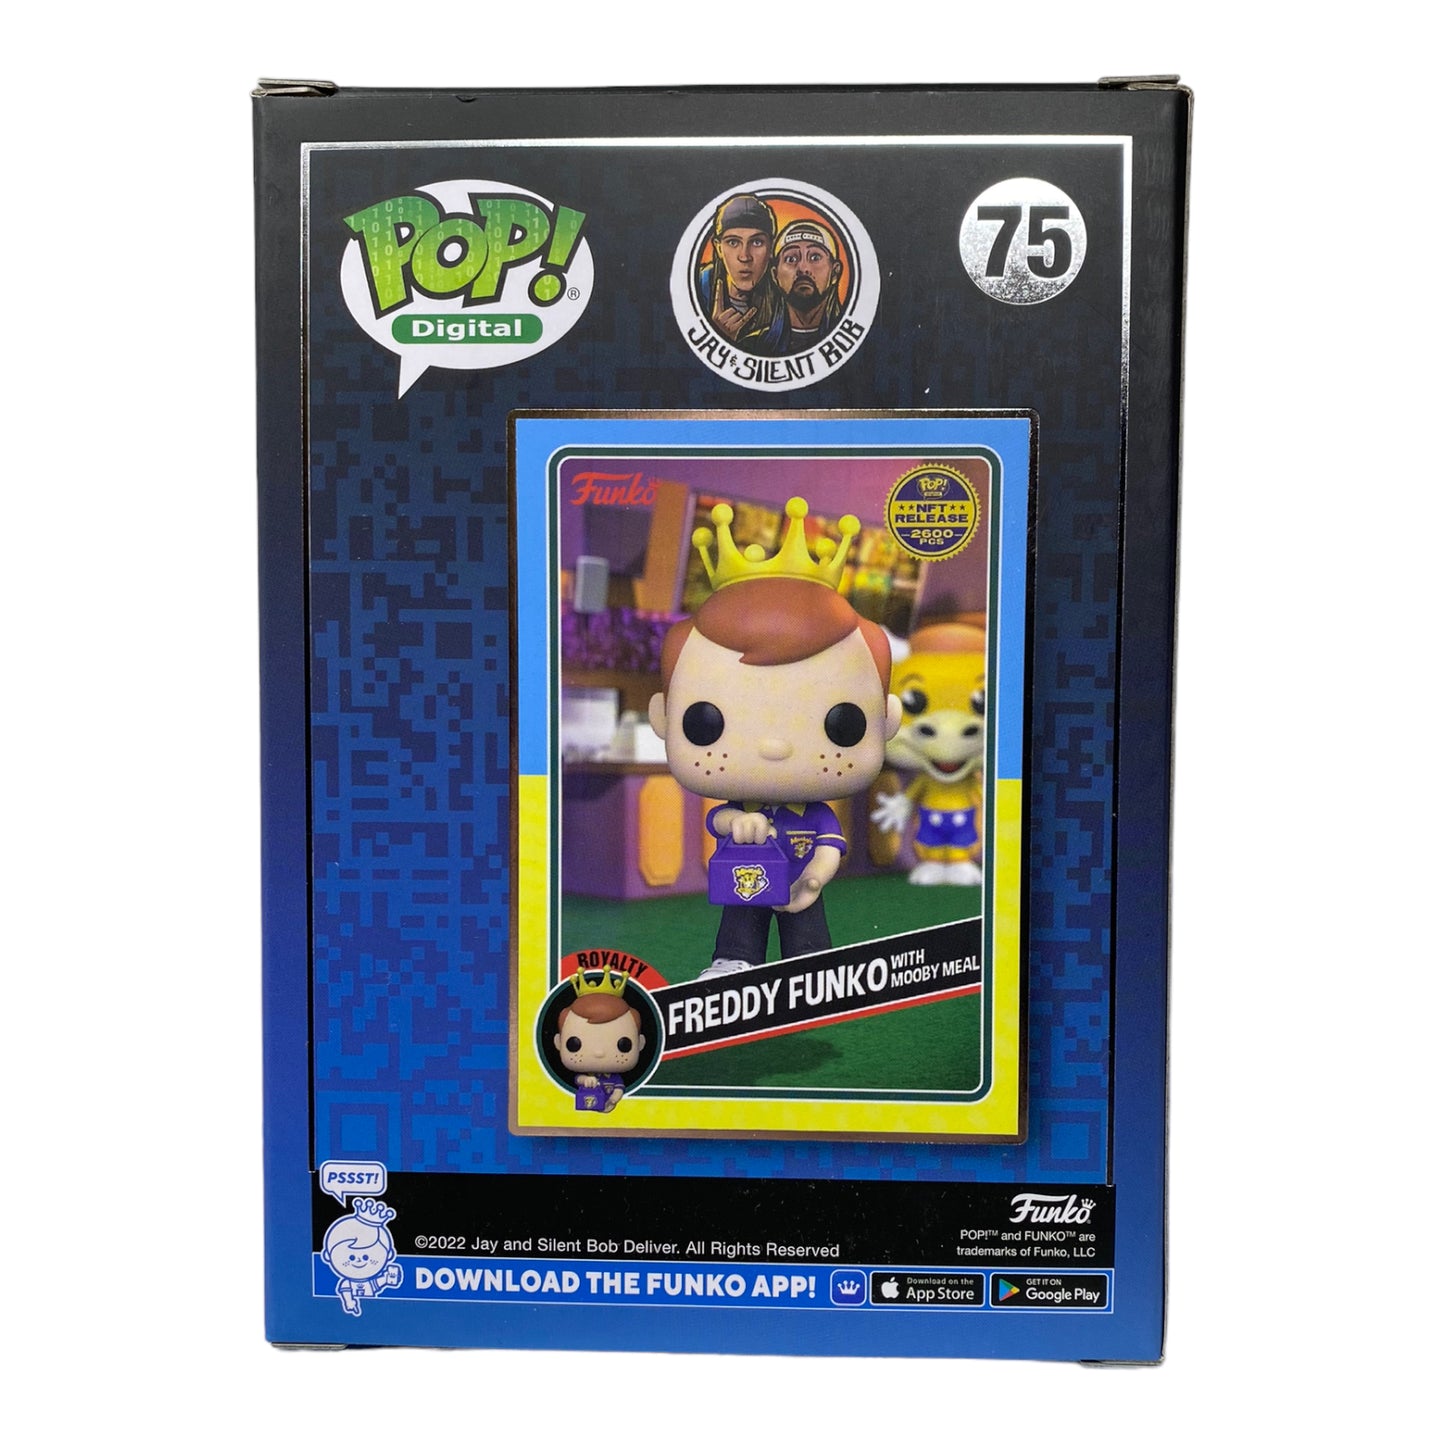 Sold NFT Freddy Funko with Mooby Meal